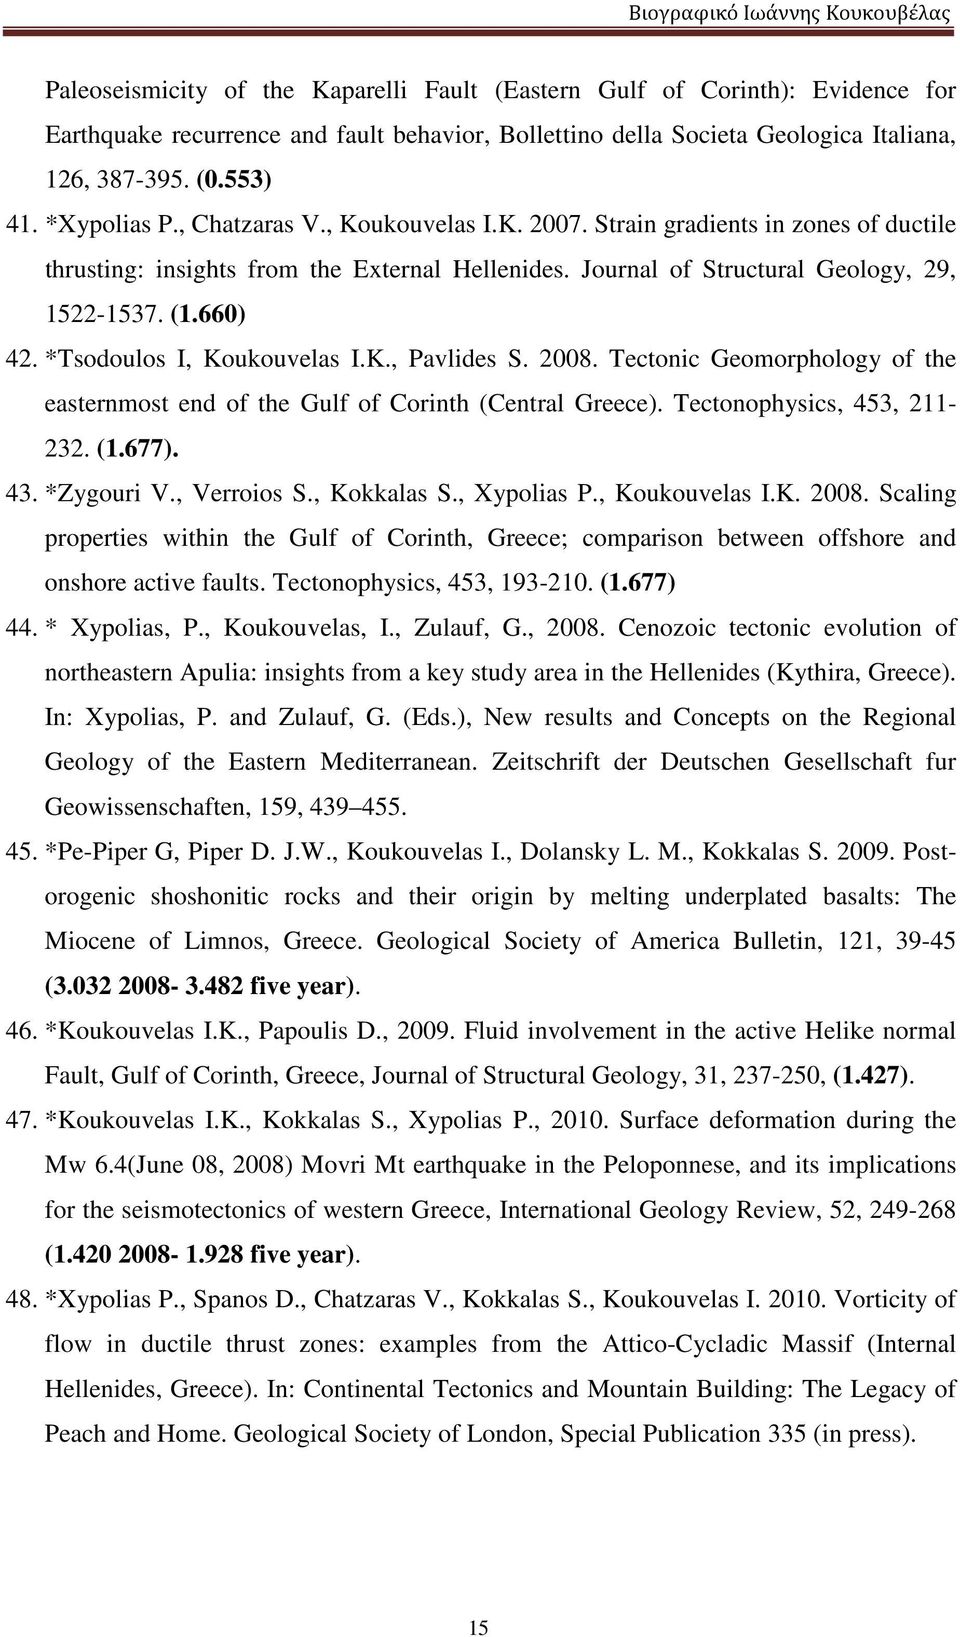 *Tsodoulos I, Koukouvelas I.K., Pavlides S. 2008. Tectonic Geomorphology of the easternmost end of the Gulf of Corinth (Central Greece). Tectonophysics, 453, 211-232. (1.677). 43. *Zygouri V.